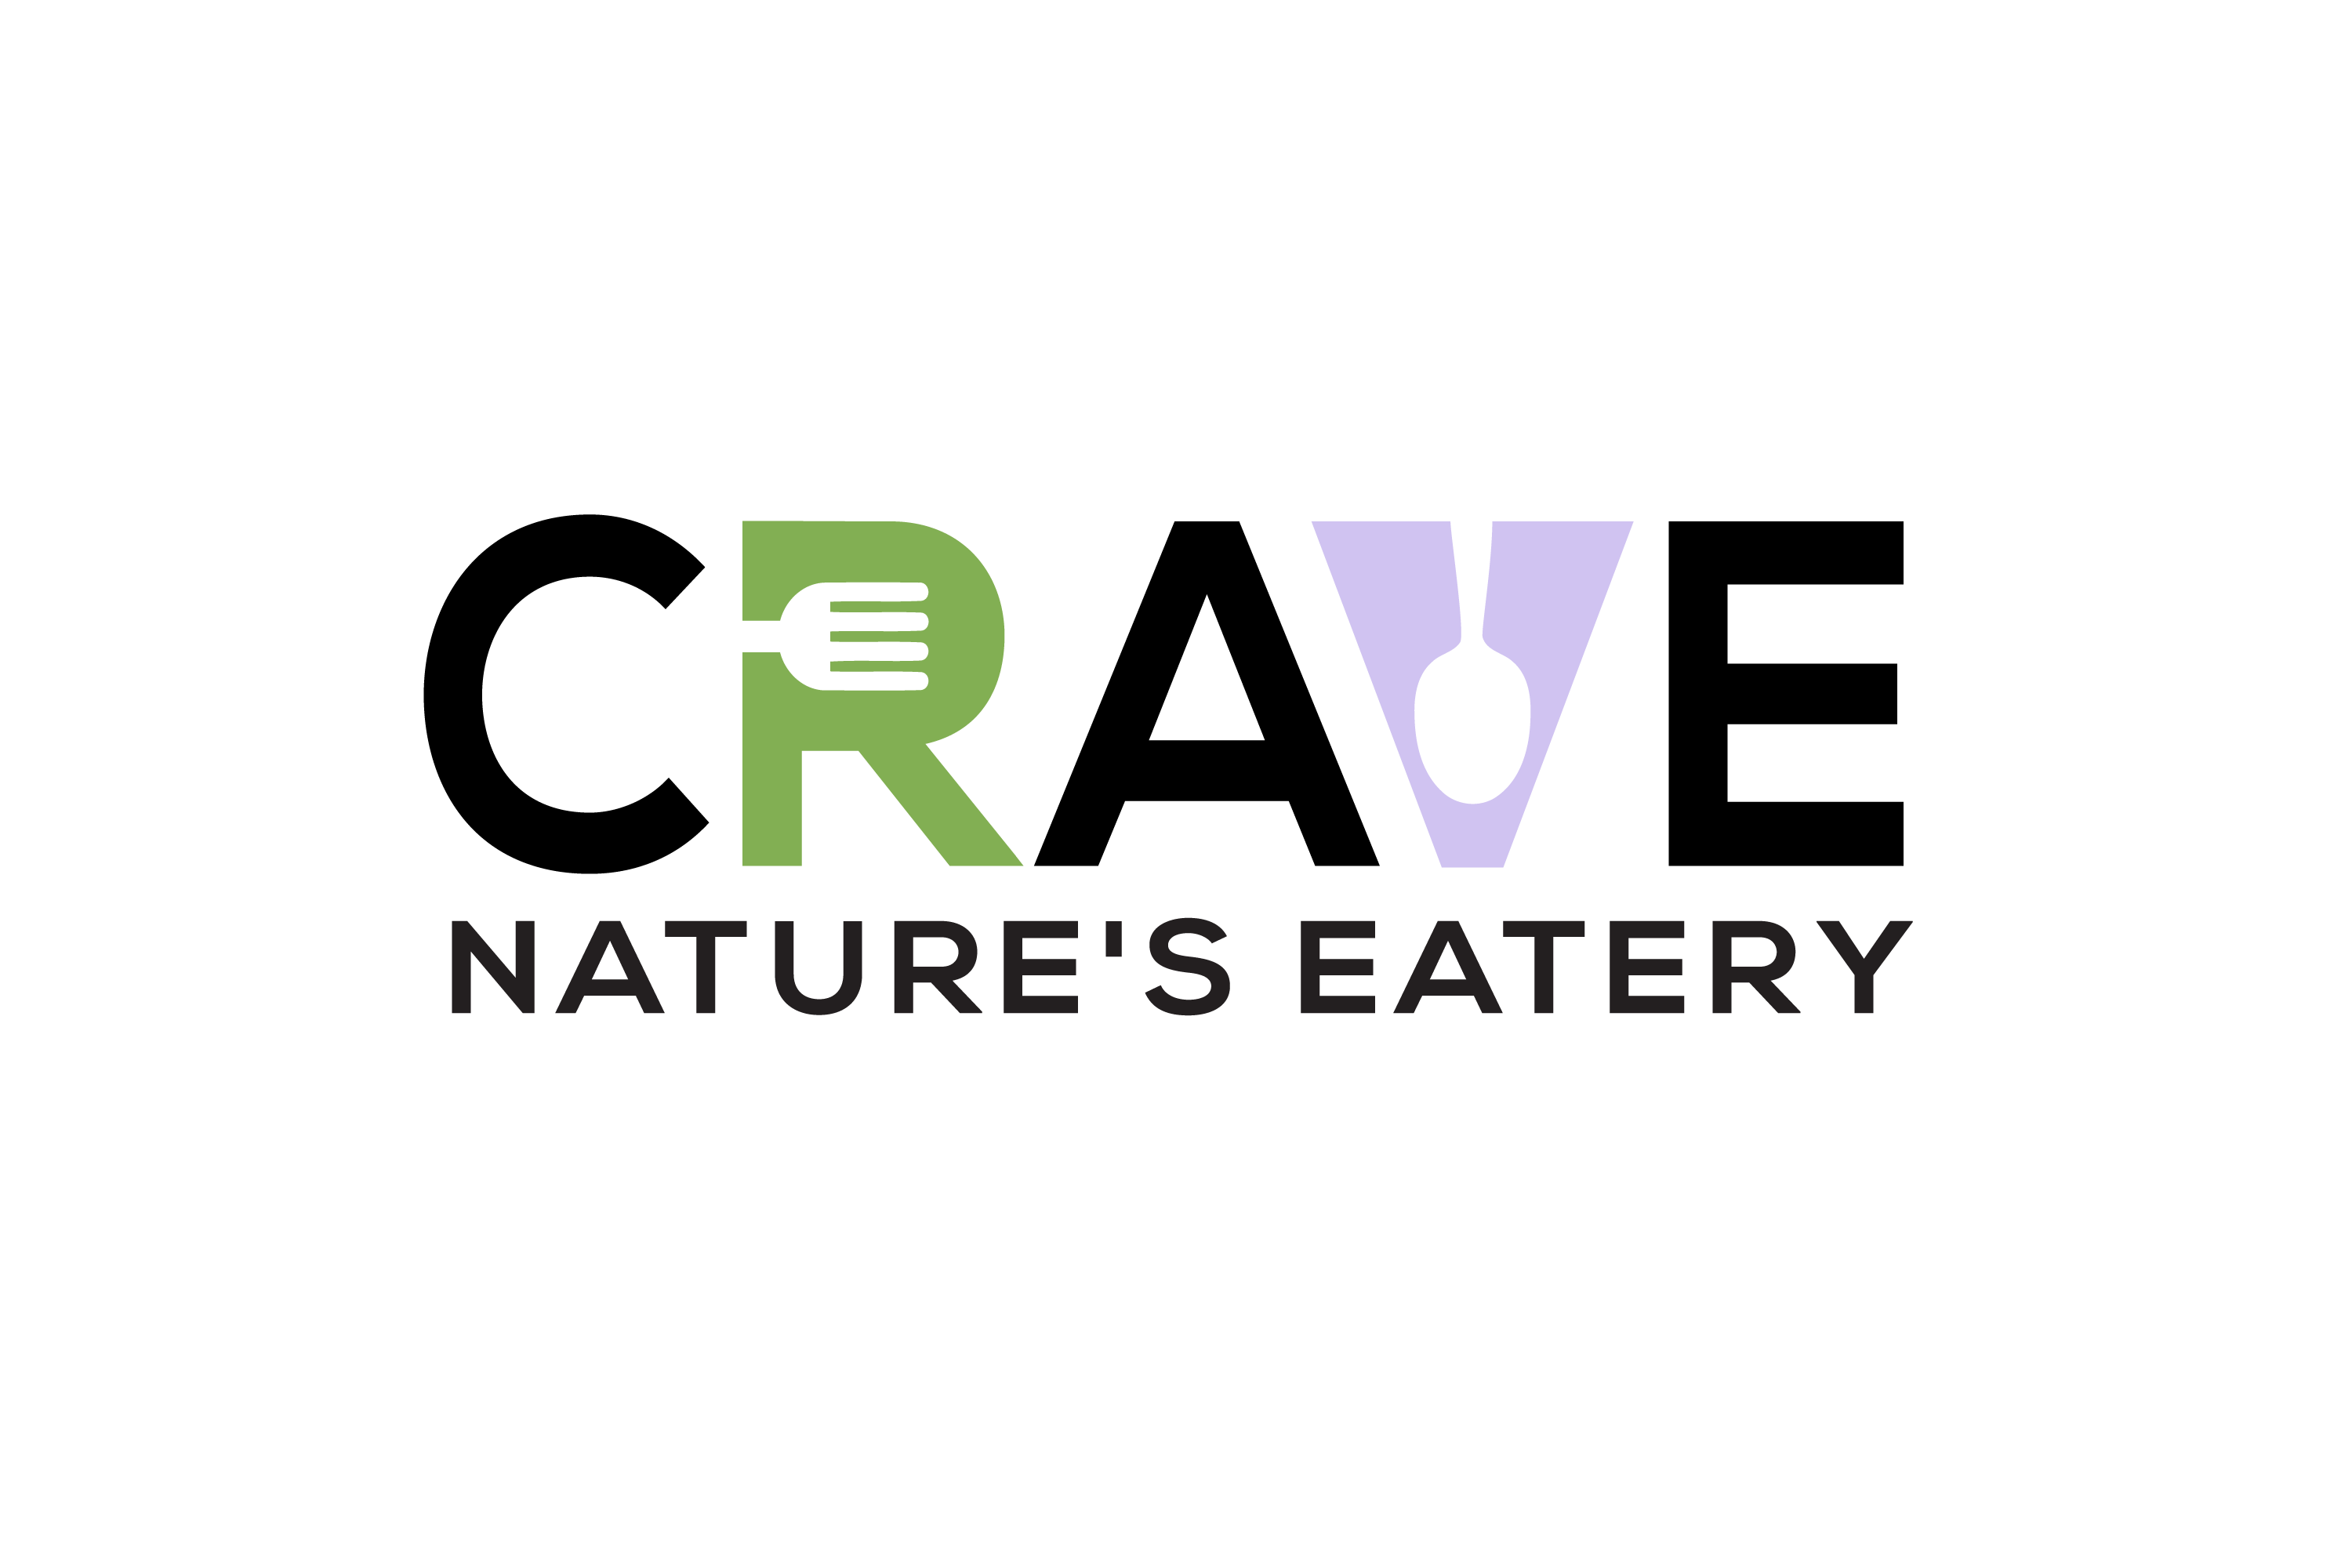 CRAVE Nature's Eatery